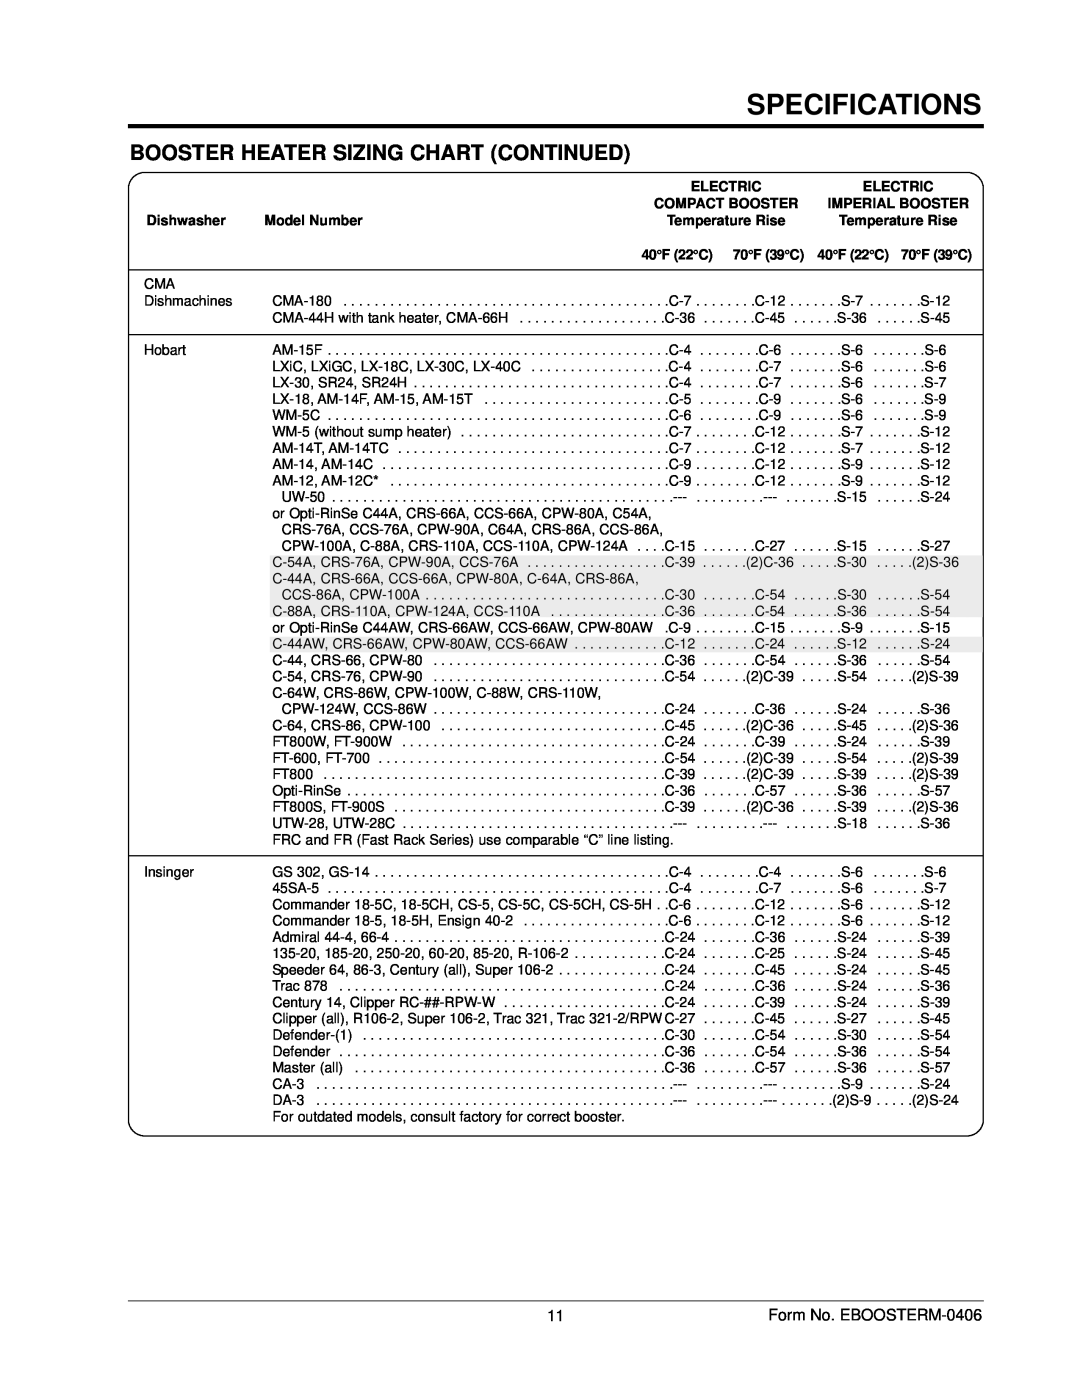 Hatco IMPERIAL "S manual Booster Heater Sizing Chart Continued, Specifications, Form No. EBOOSTERM-0406 